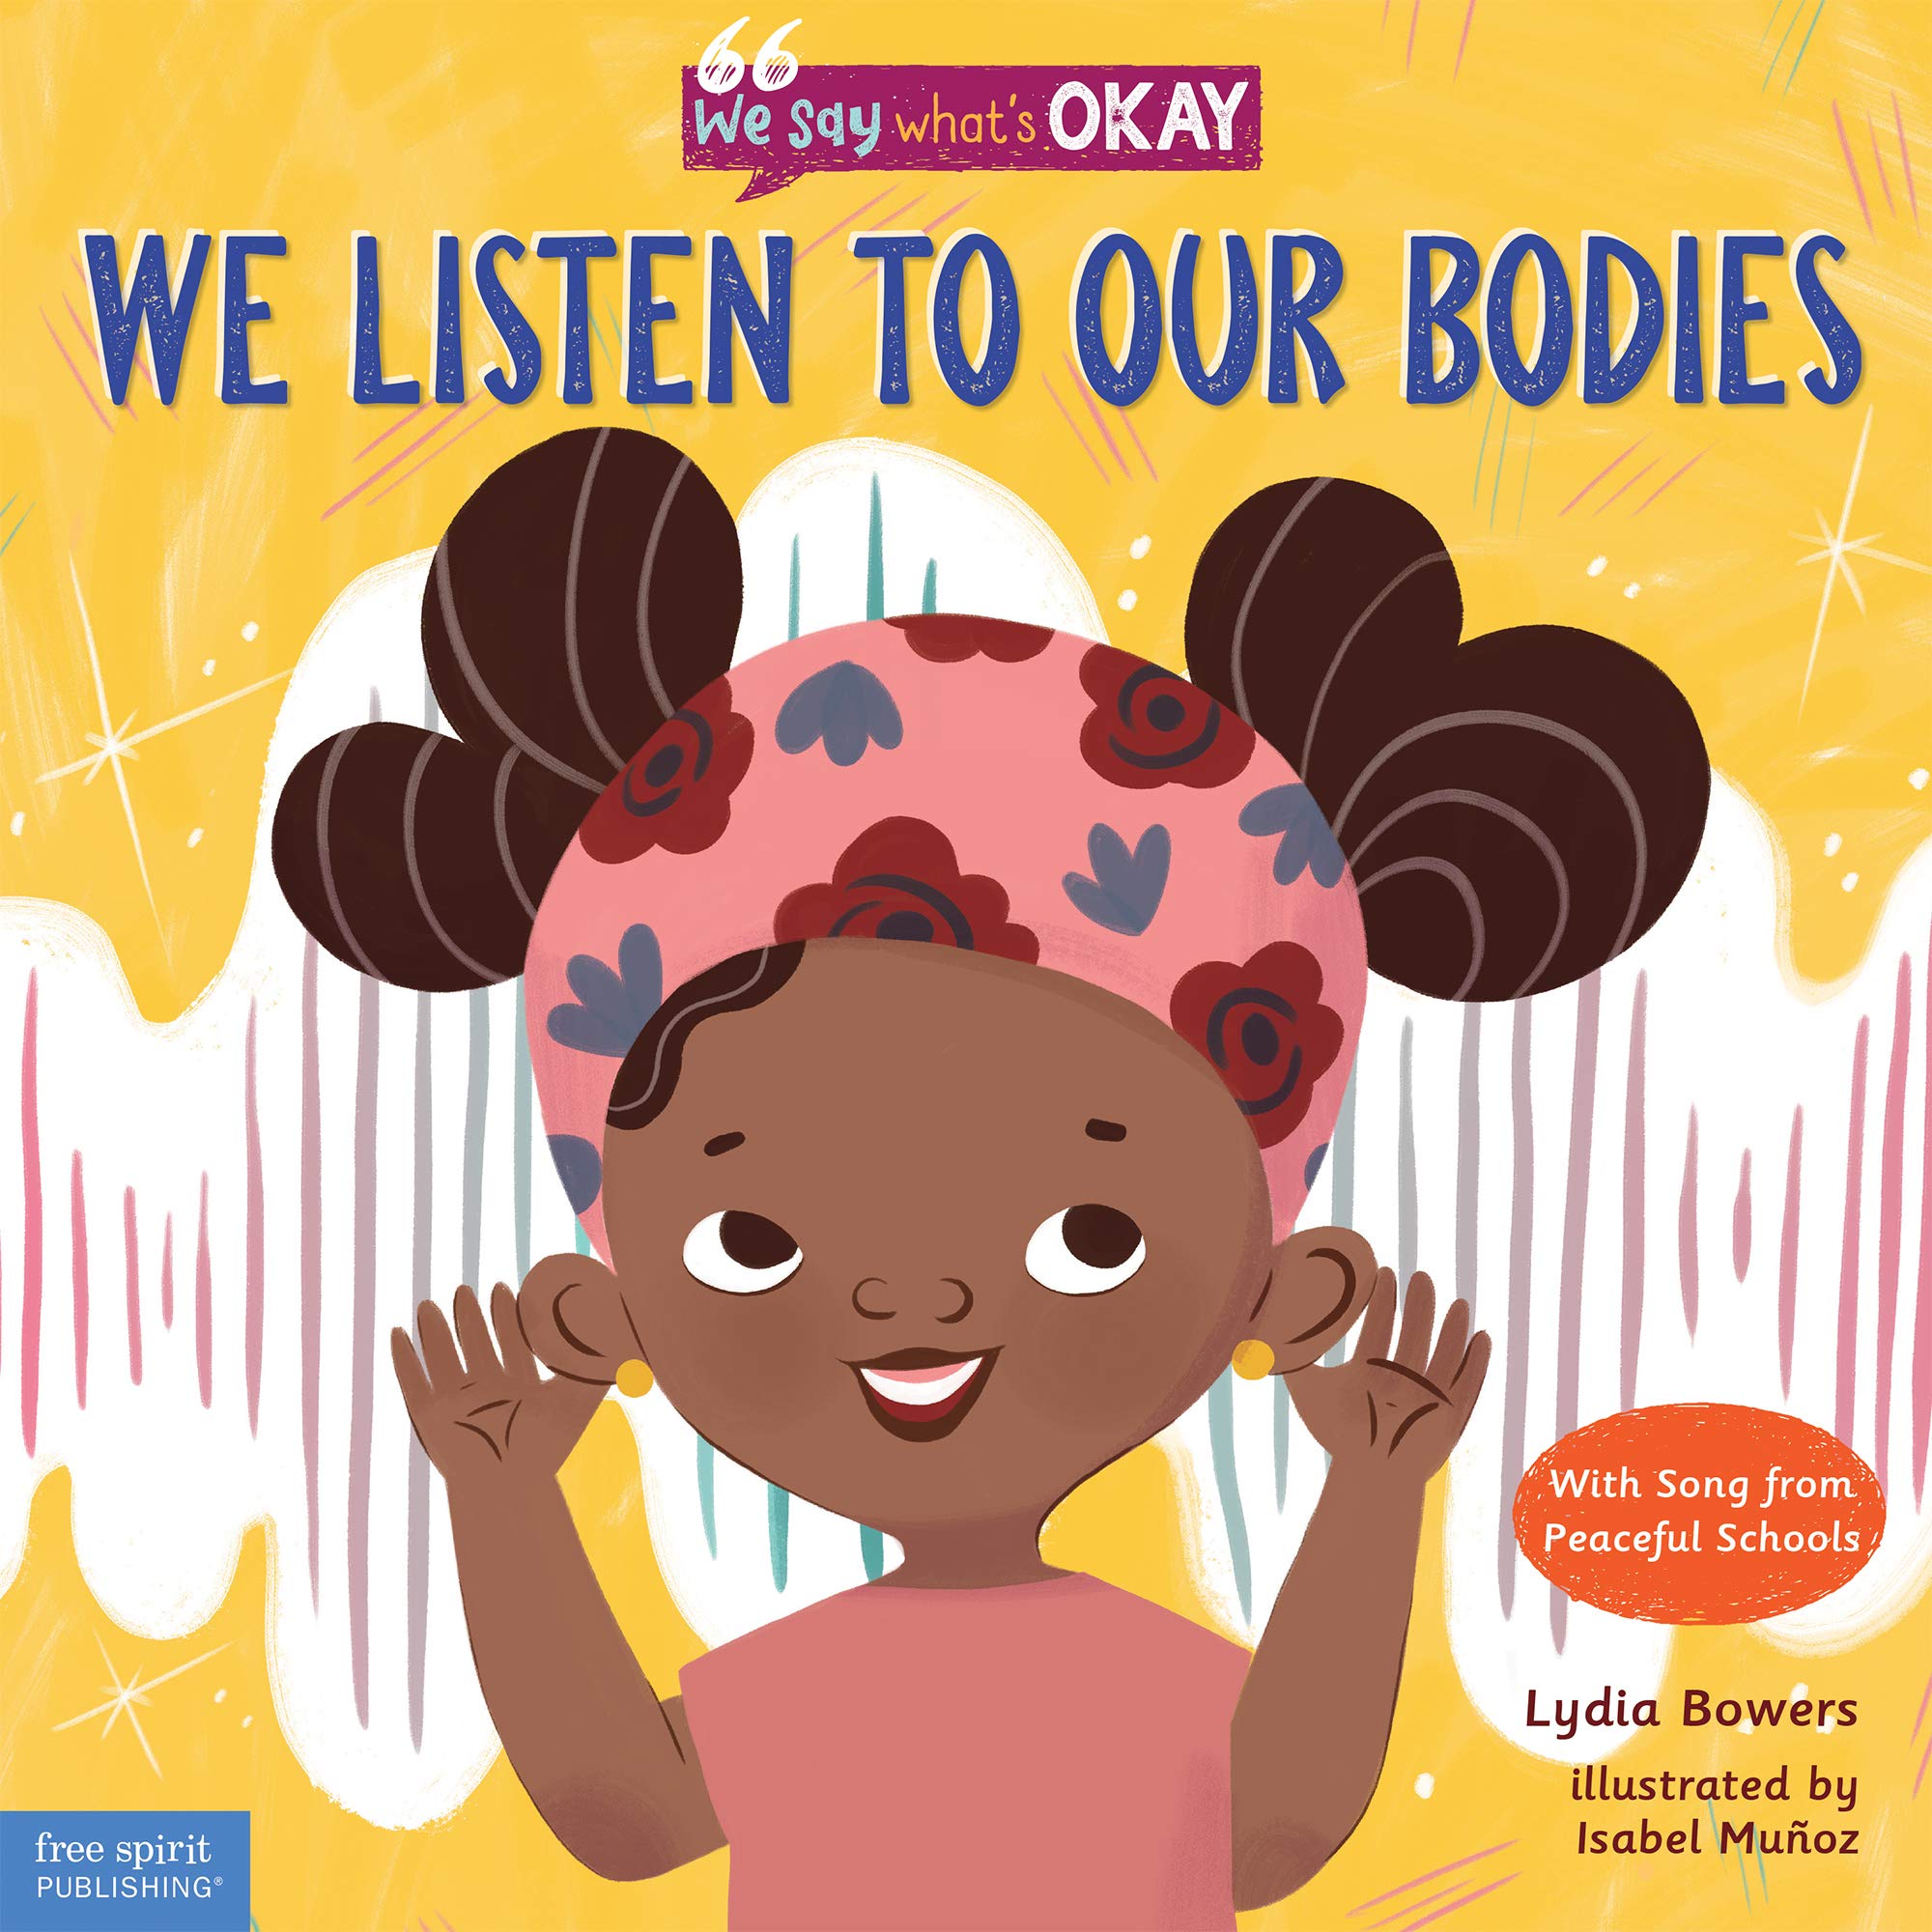 We Listen to Our Bodies (We Say What's Okay Series) Hardcover